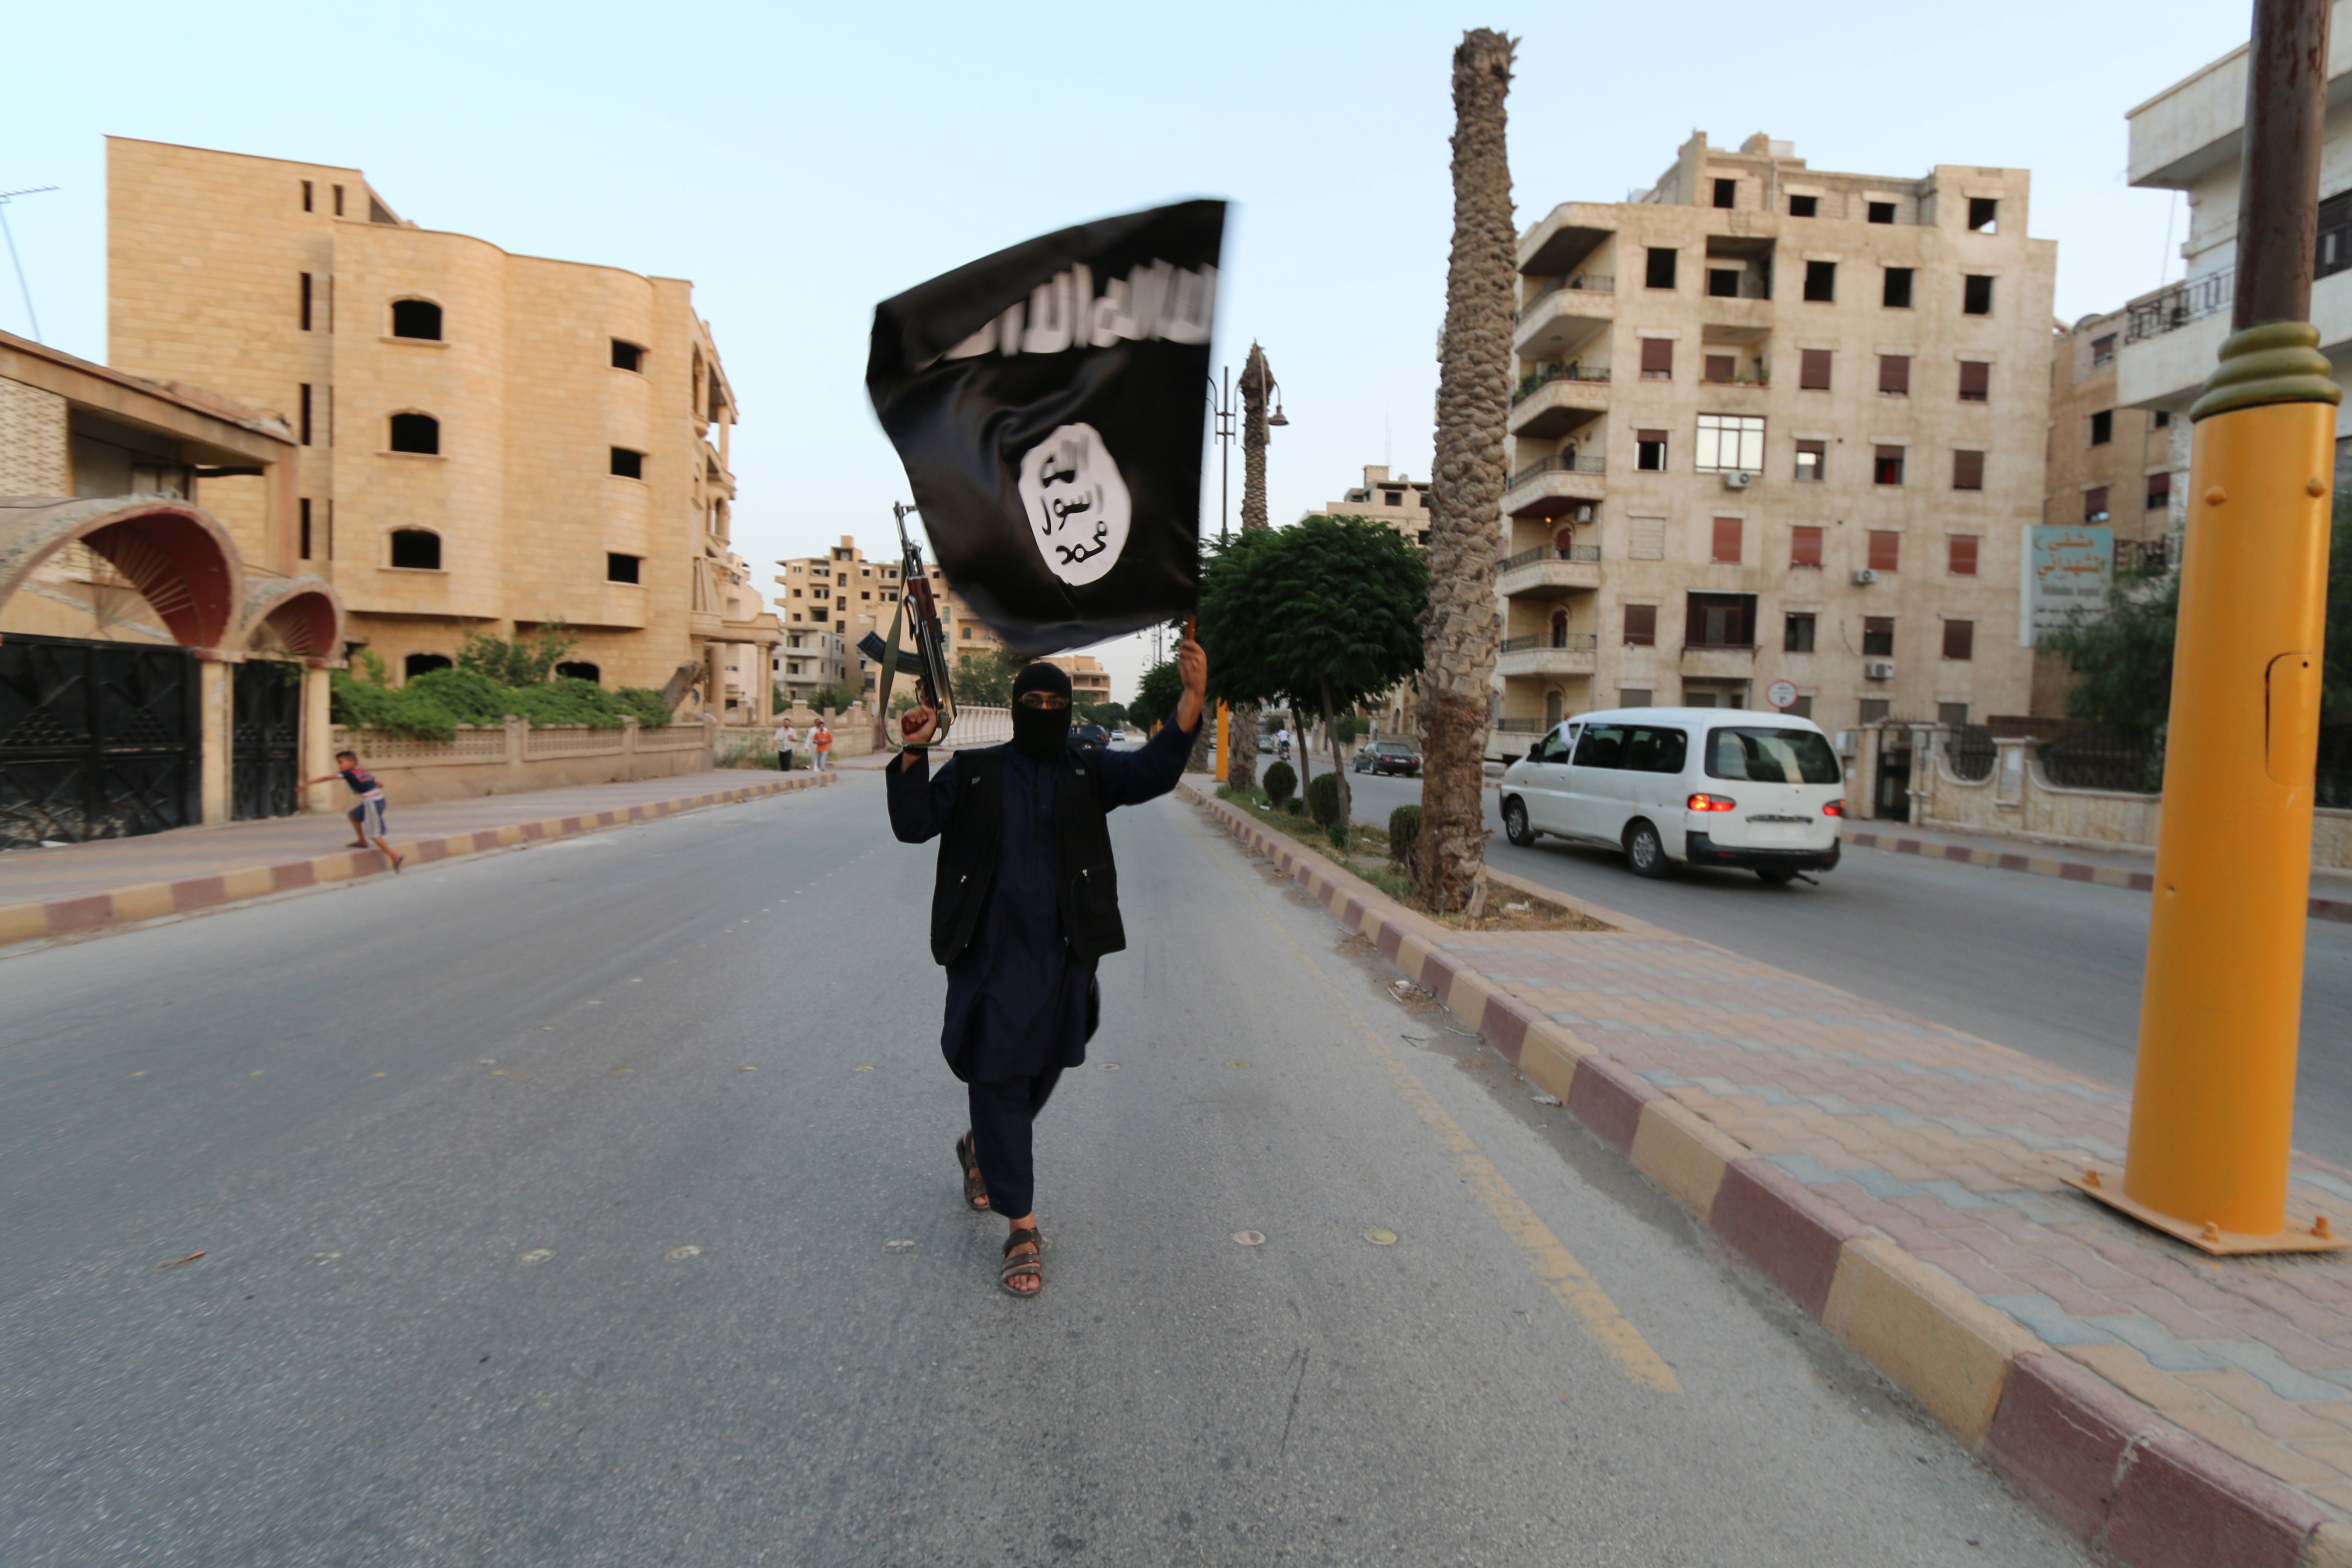 A member loyal to the Islamic State in Iraq and the Levant waves an ISIS flag in Raqqa on June 29, 2014. (Reuters)